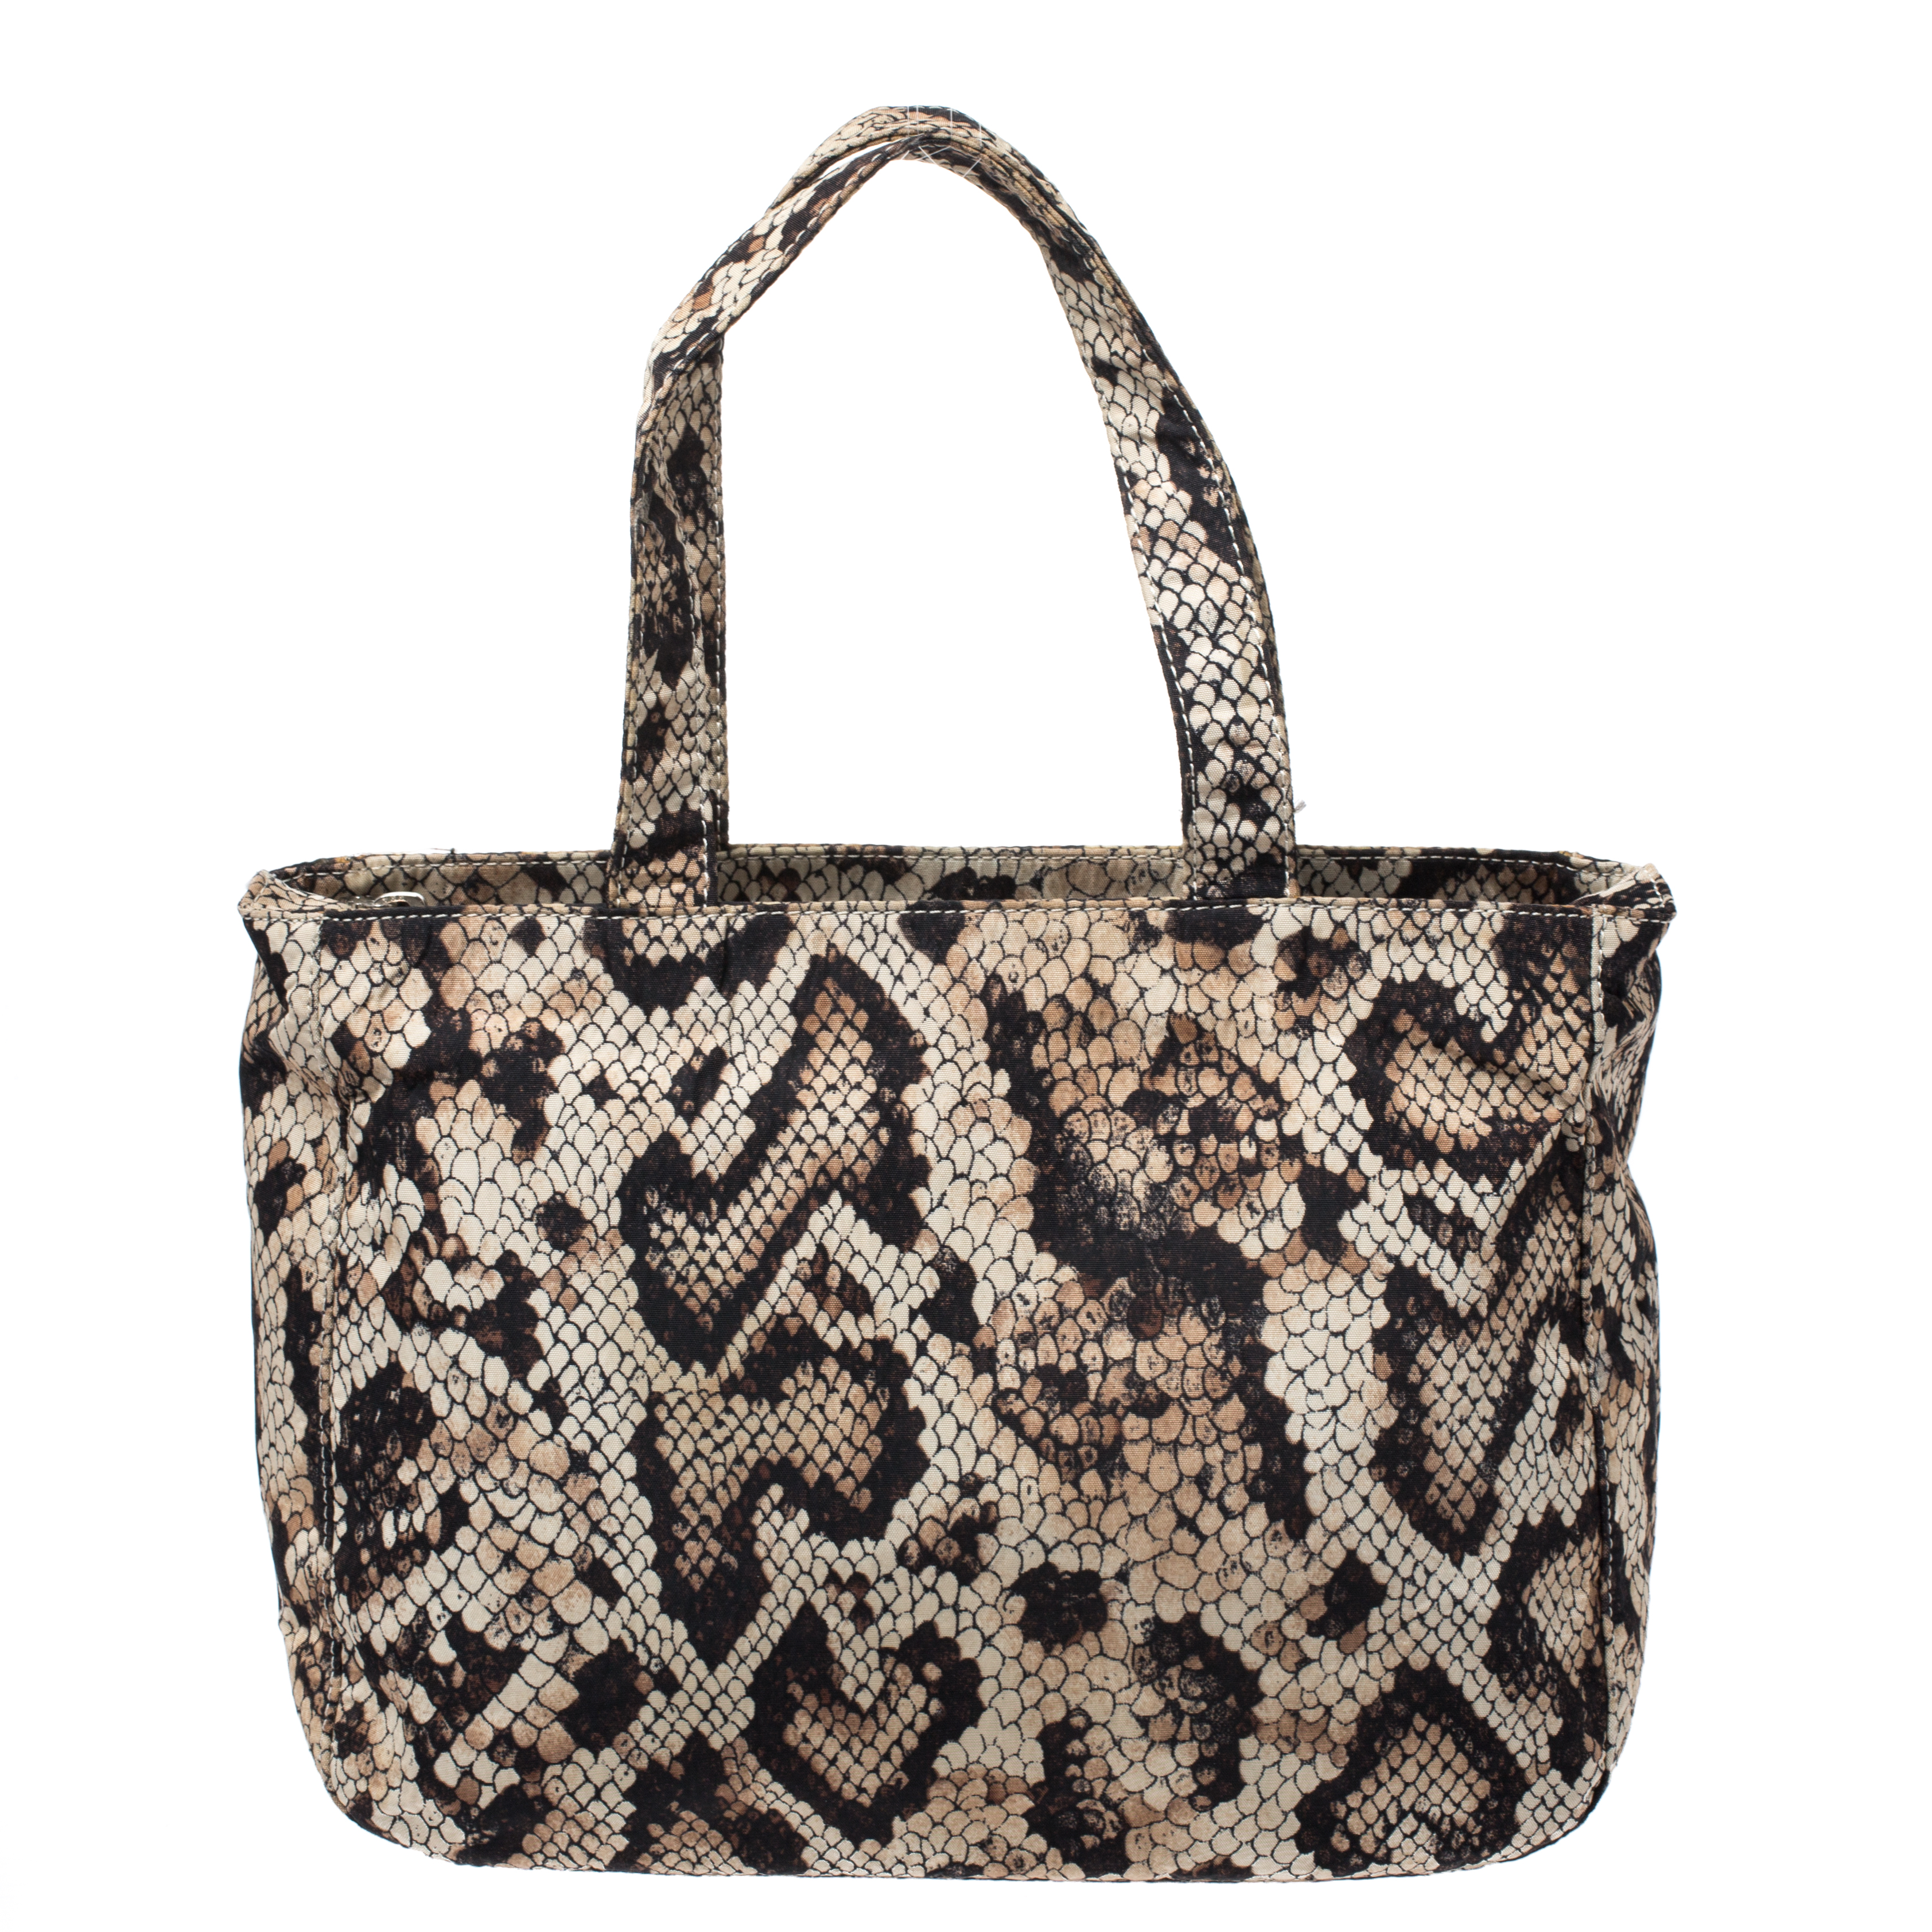 Do you know what would be the perfect tote to swing for your daily errands or sprees? This one here from Dolce and Gabbana. It is perfect Crafted from python printed fabric the bag has a lovely shape two matching handles and a spacious interior.